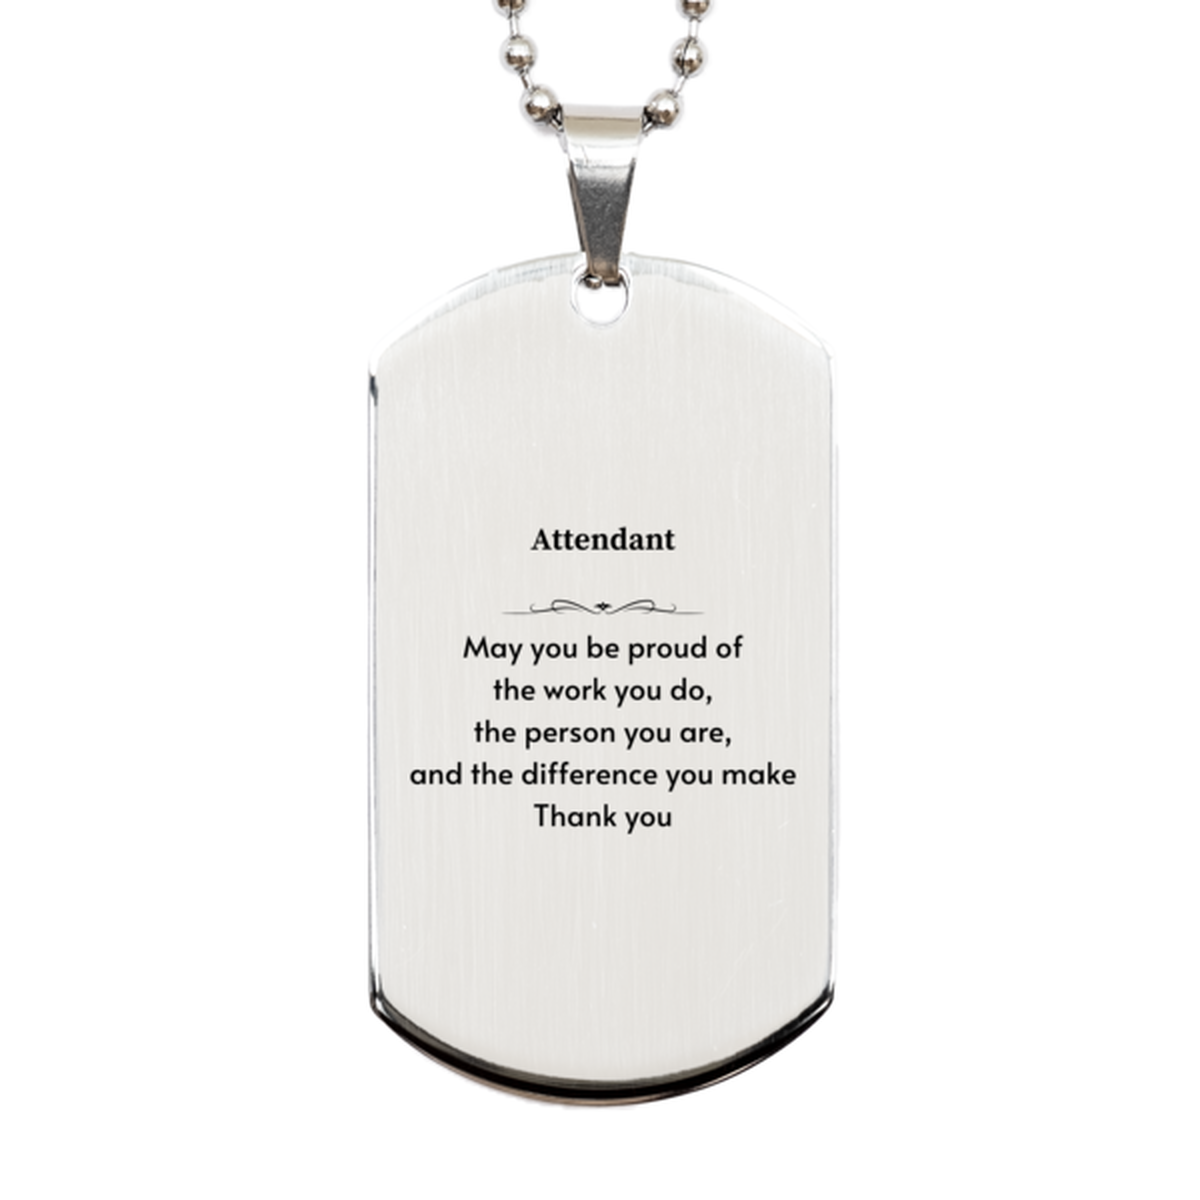 Heartwarming Silver Dog Tag Retirement Coworkers Gifts for Attendant, Attendant May You be proud of the work you do, the person you are Gifts for Boss Men Women Friends